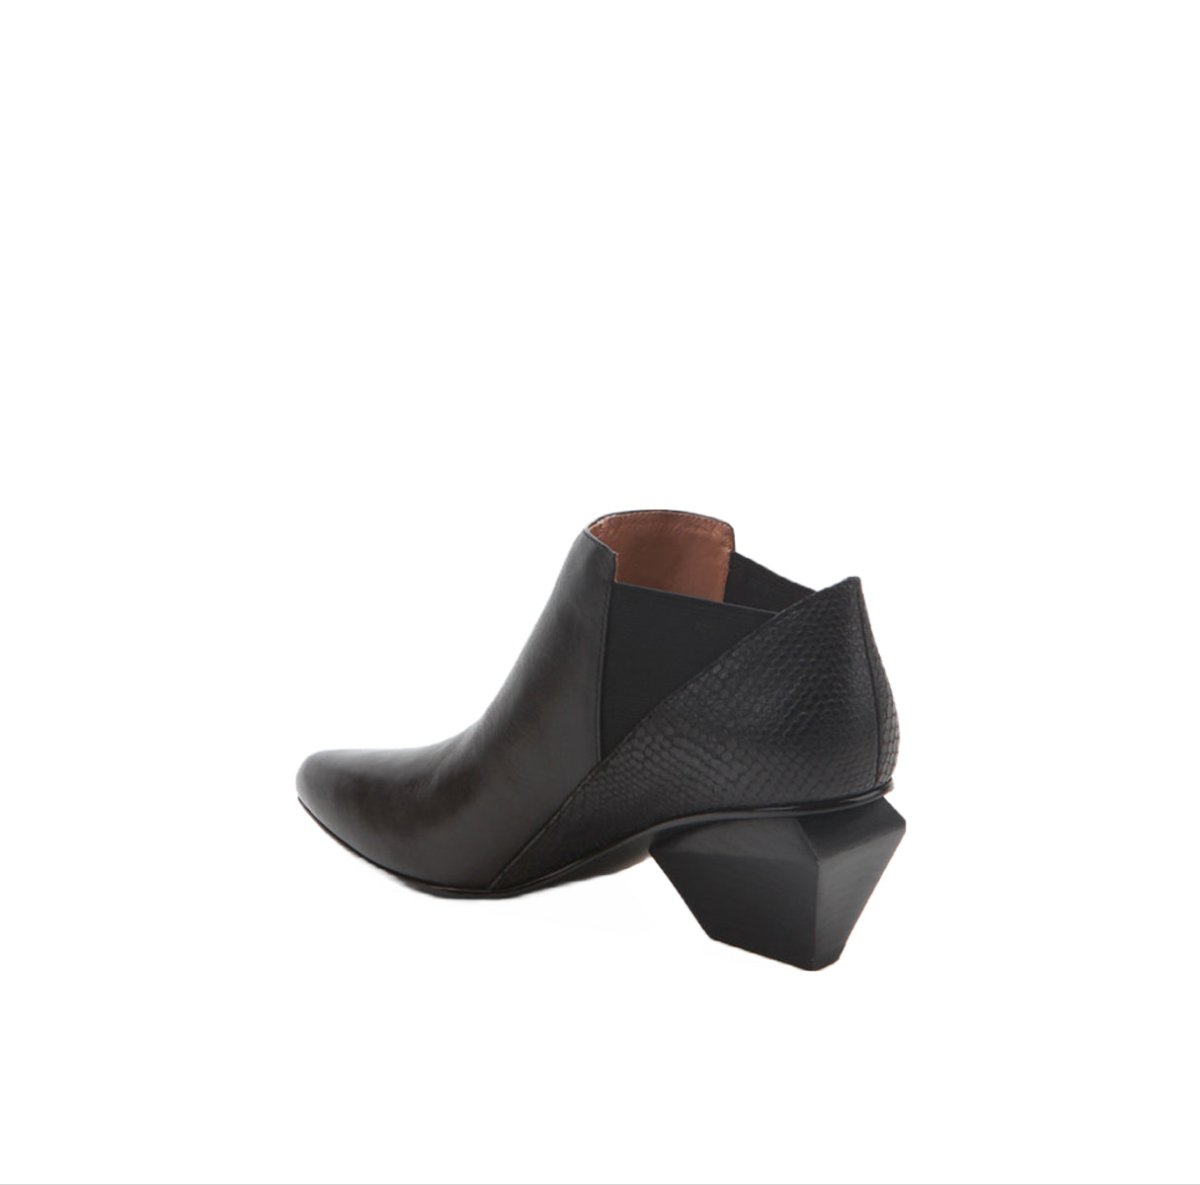 Speciali Leather Black Boots - 0cm